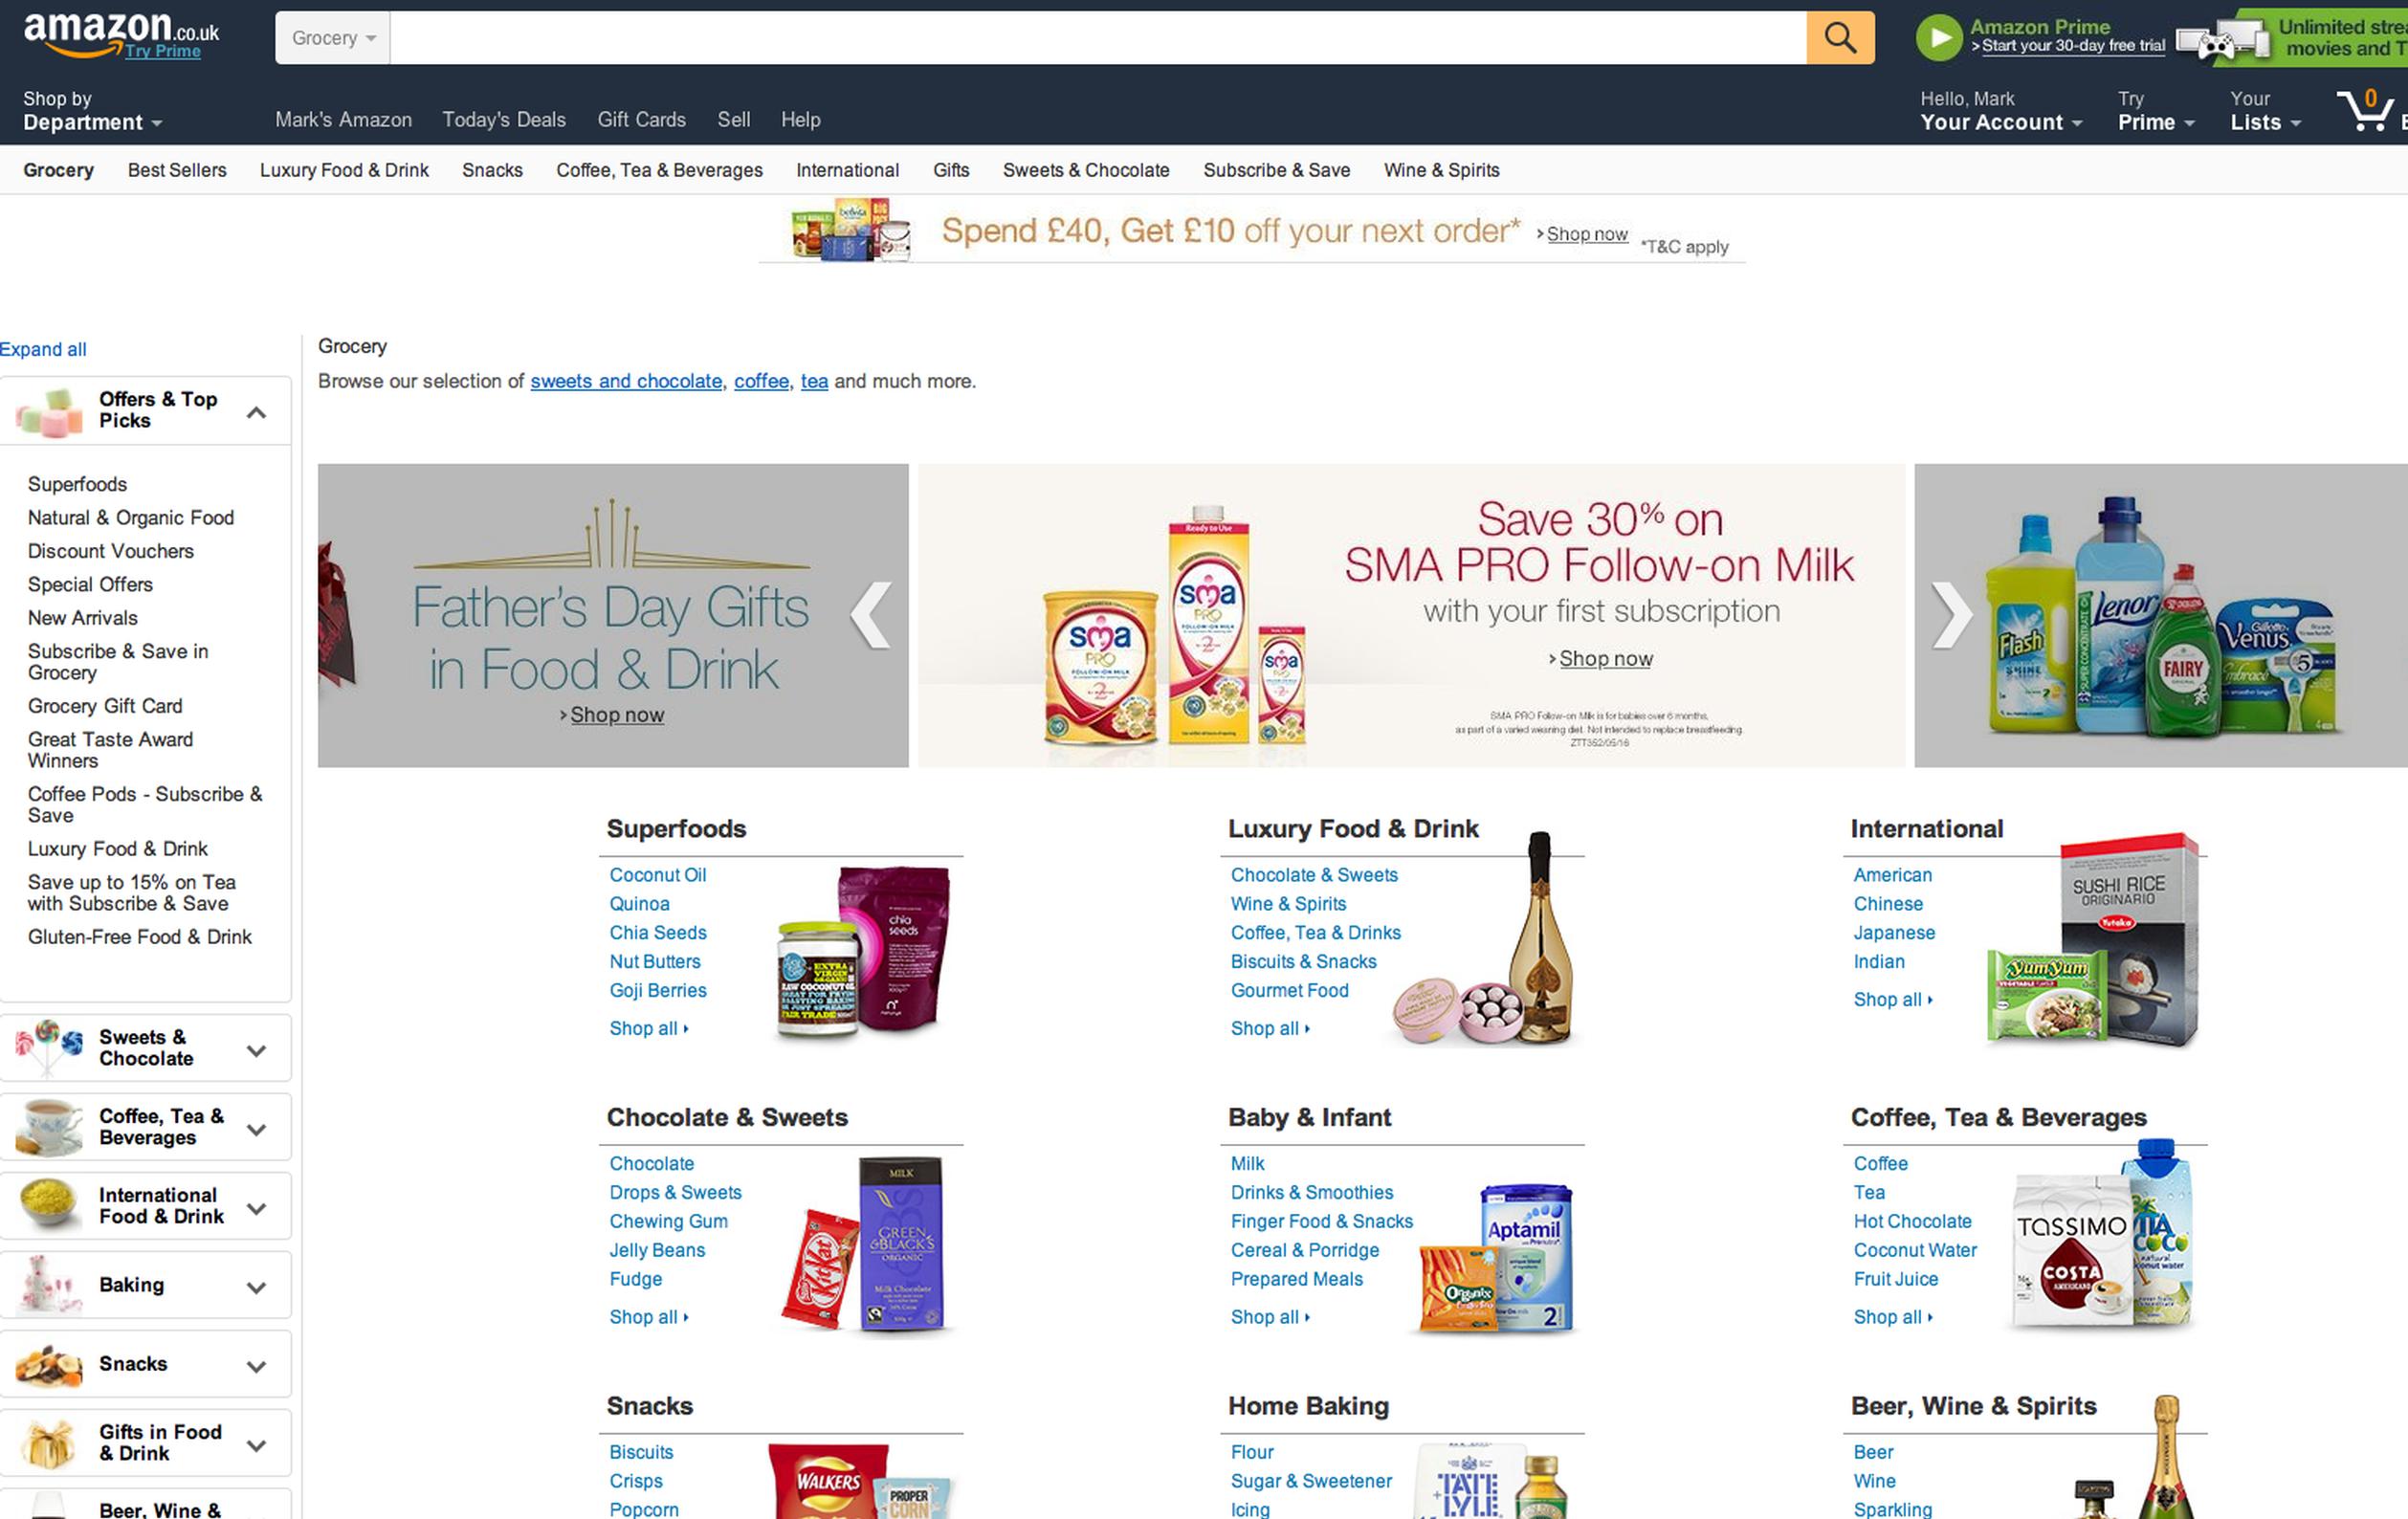 Amazon`s grocery offer